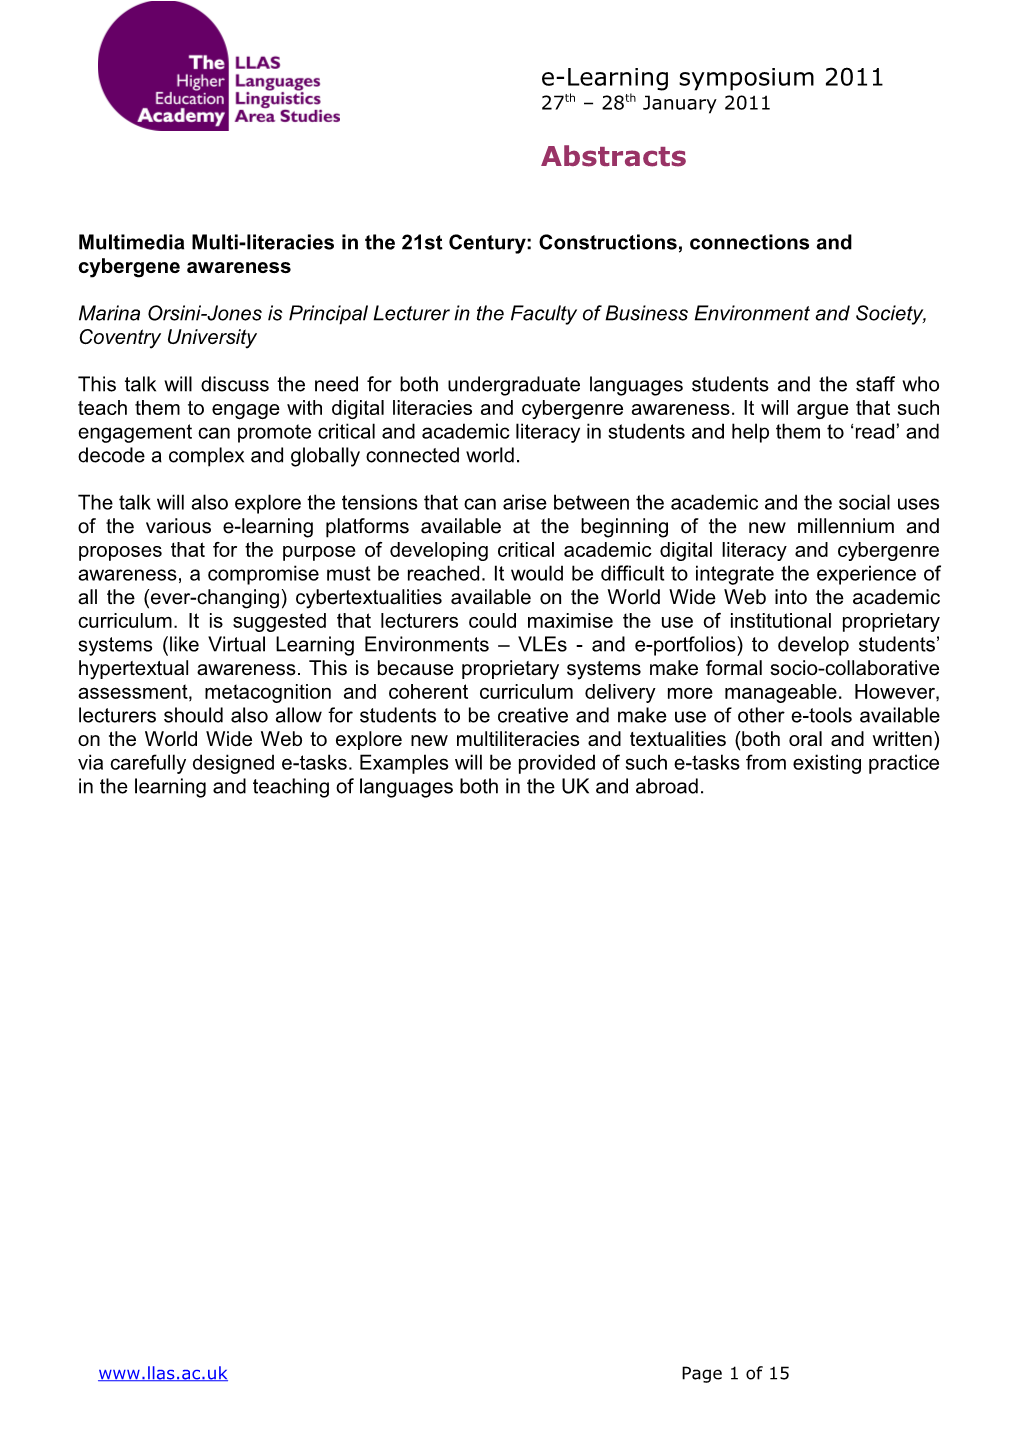 Multimedia Multi-Literacies in the 21St Century: Constructions, Connections and Cybergene